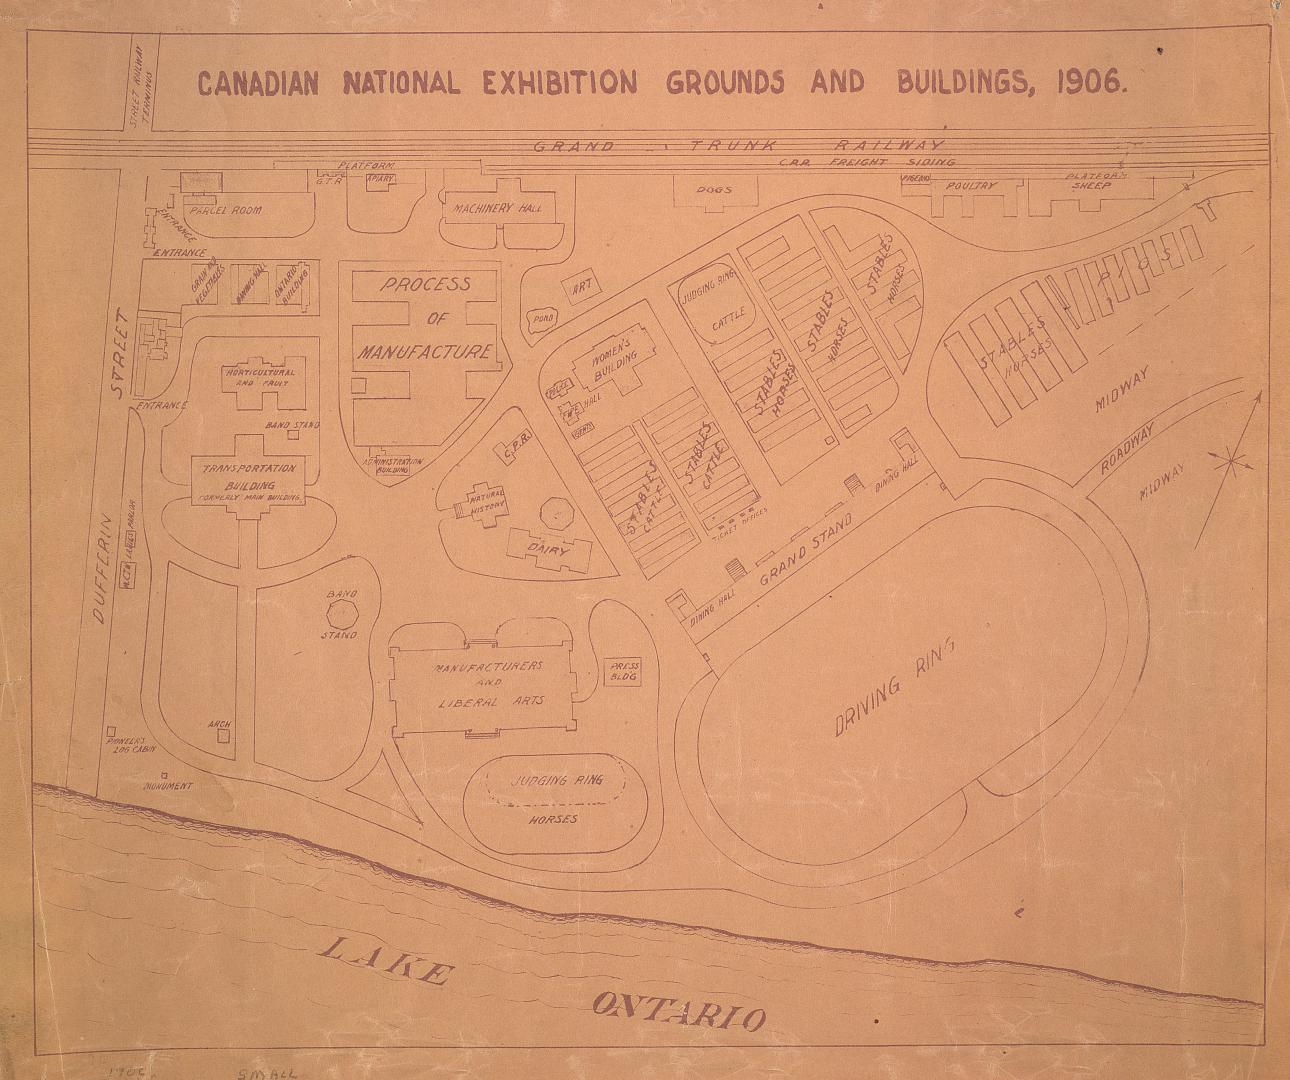 Canadian National Exhibition grounds and buildings, 1906